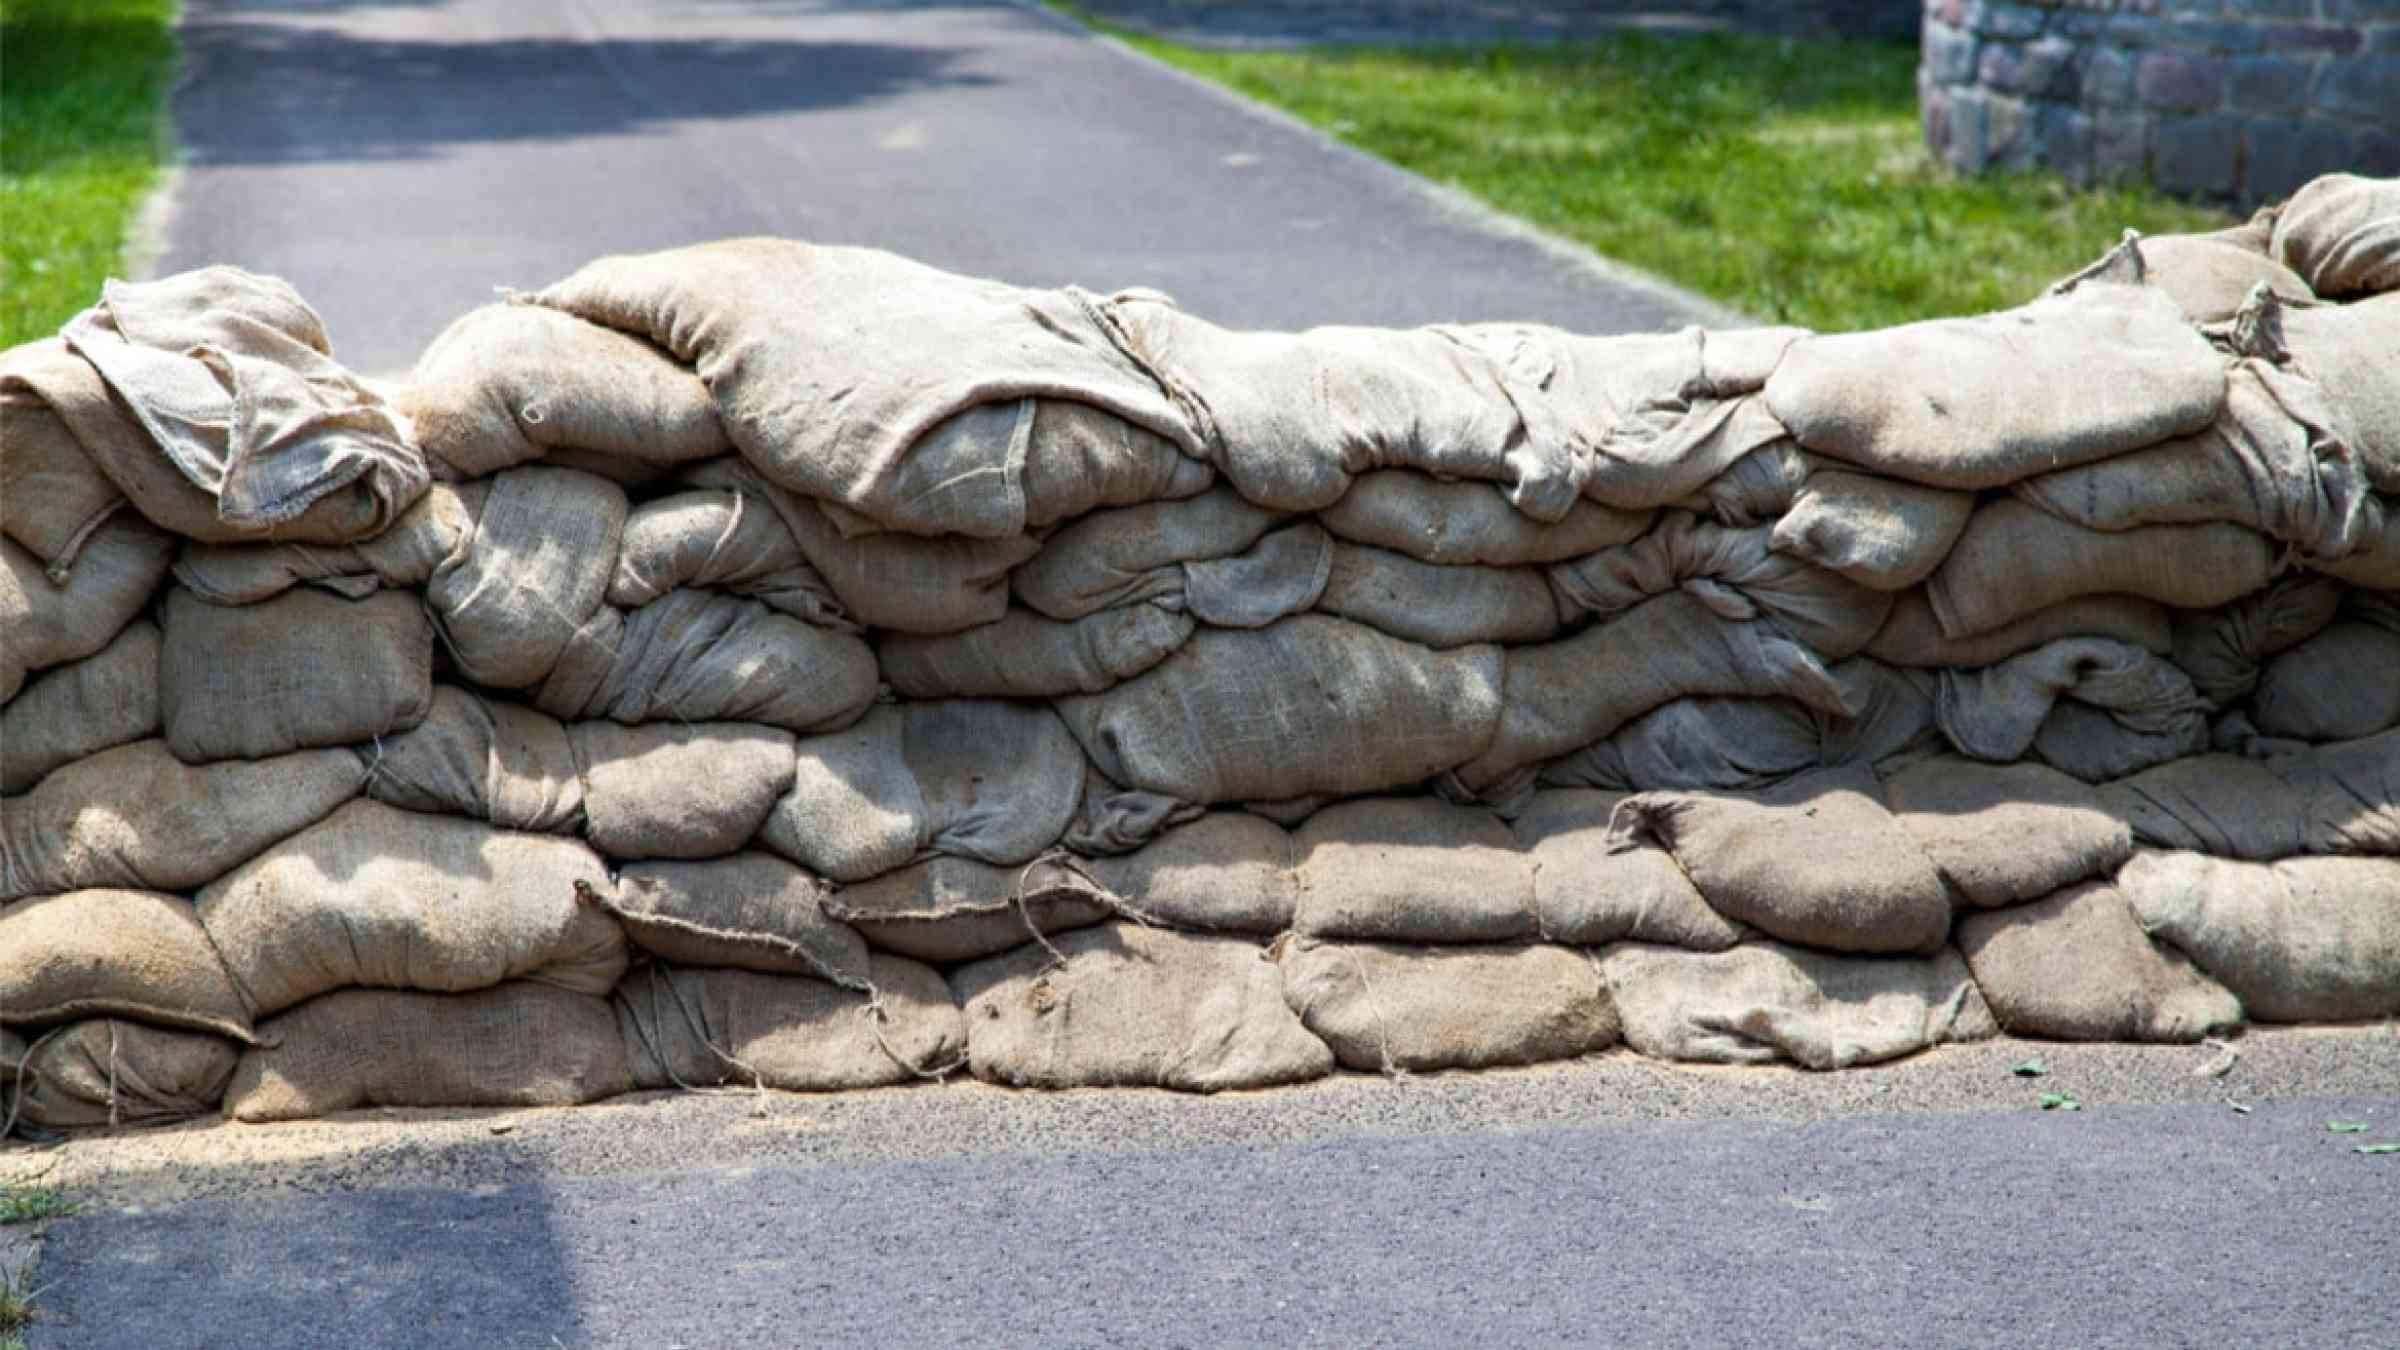 Sandbags positioned on a road to protect against floods